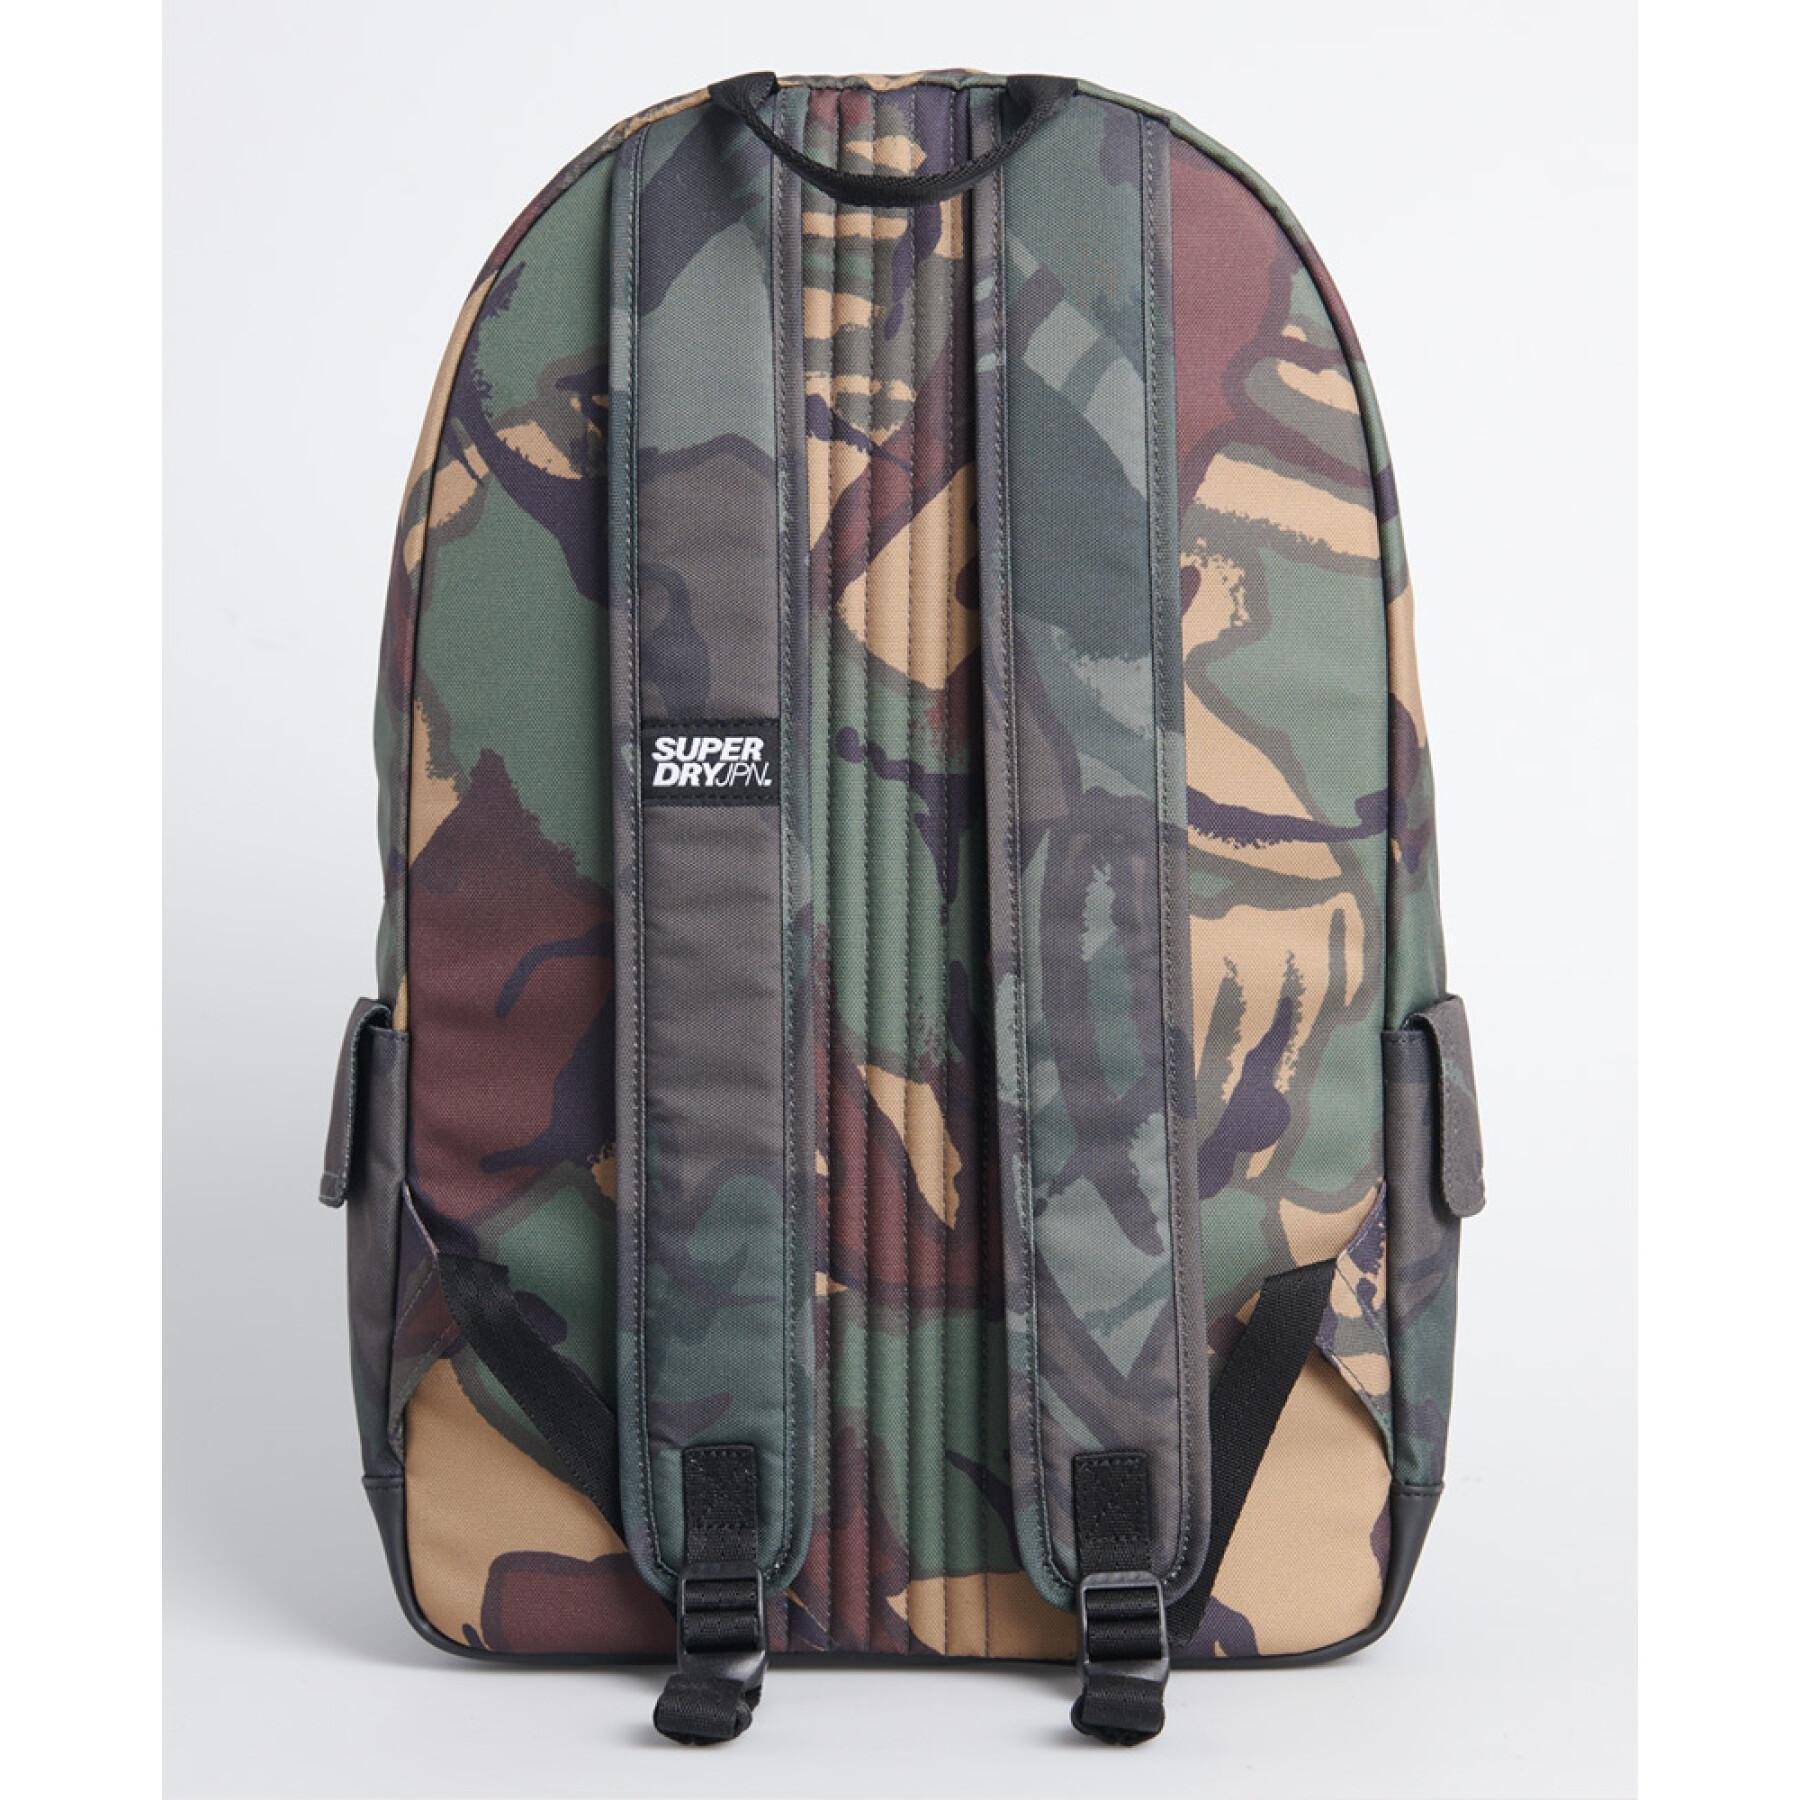 Camouflage backpack Superdry Montana